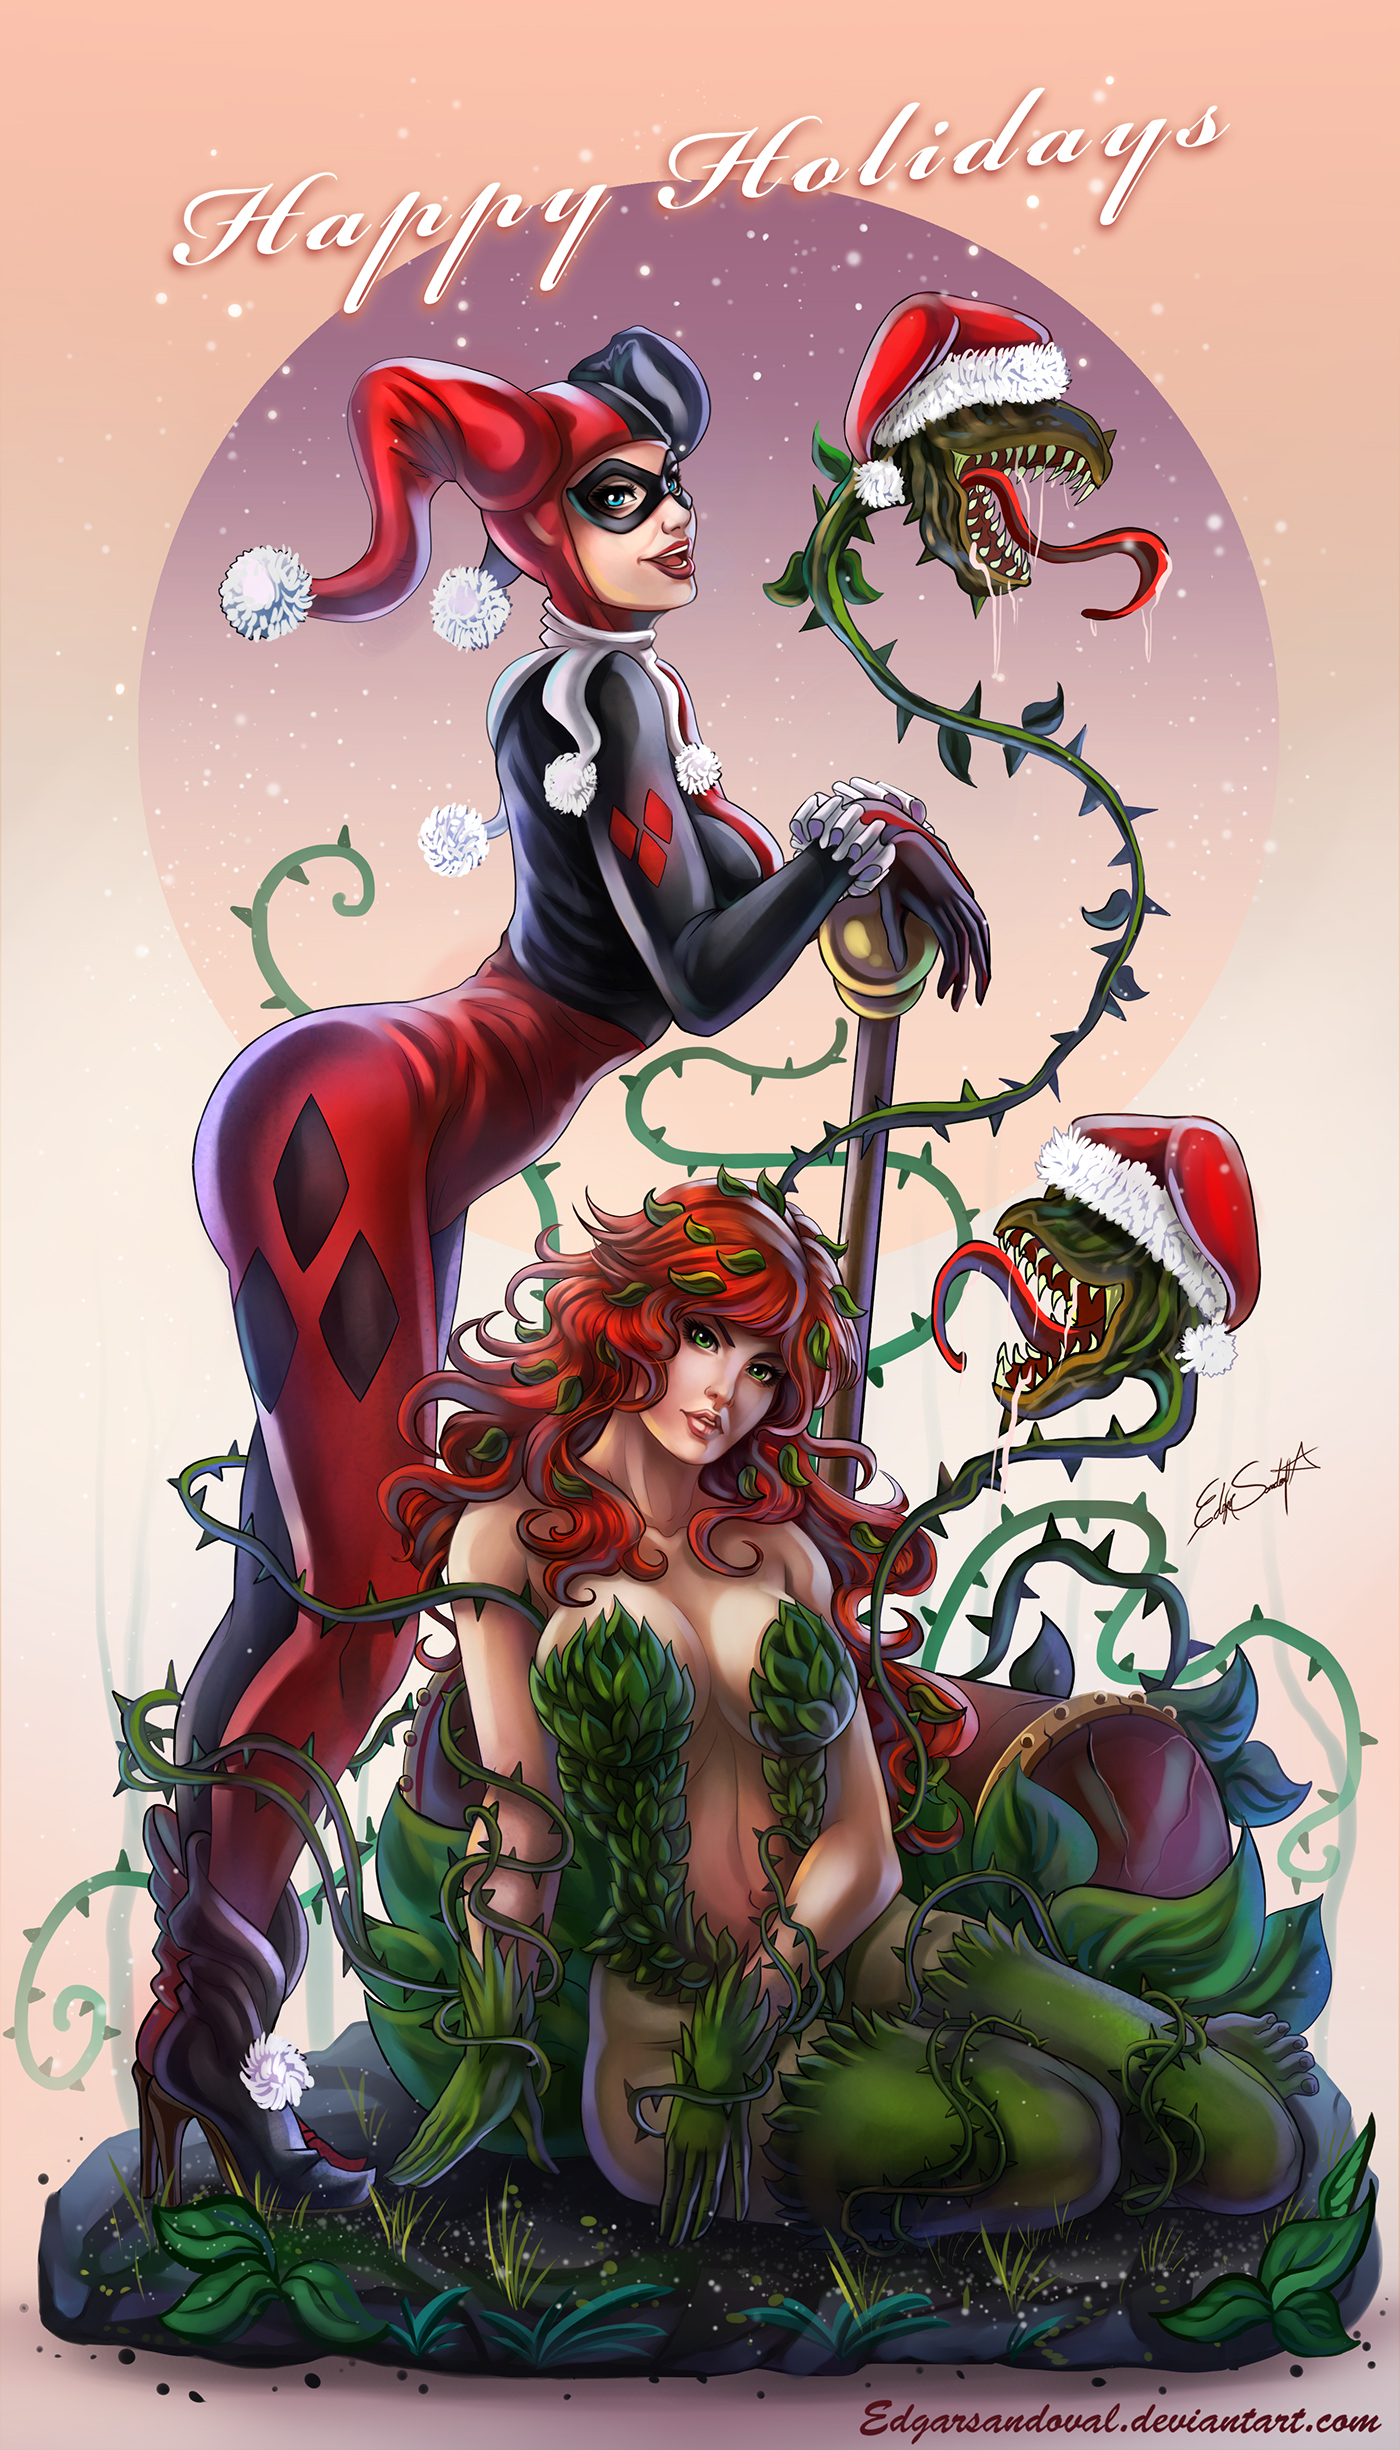 crystal de alba recommends Harley Quinn And Poison Ivy Hot